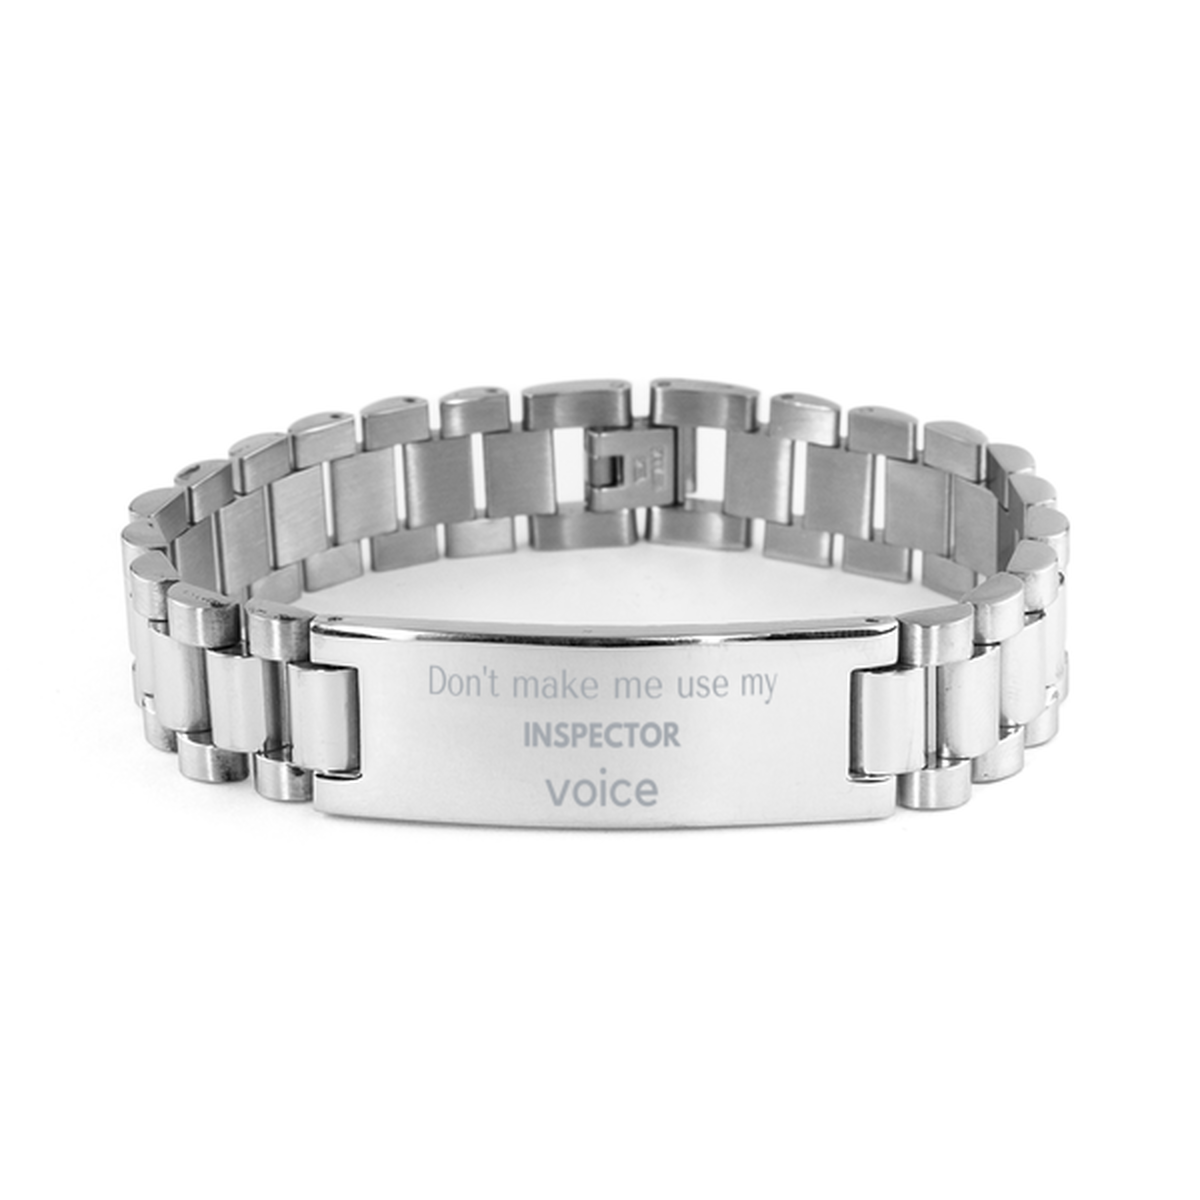 Don't make me use my Inspector voice, Sarcasm Inspector Gifts, Christmas Inspector Ladder Stainless Steel Bracelet Birthday Unique Gifts For Inspector Coworkers, Men, Women, Colleague, Friends